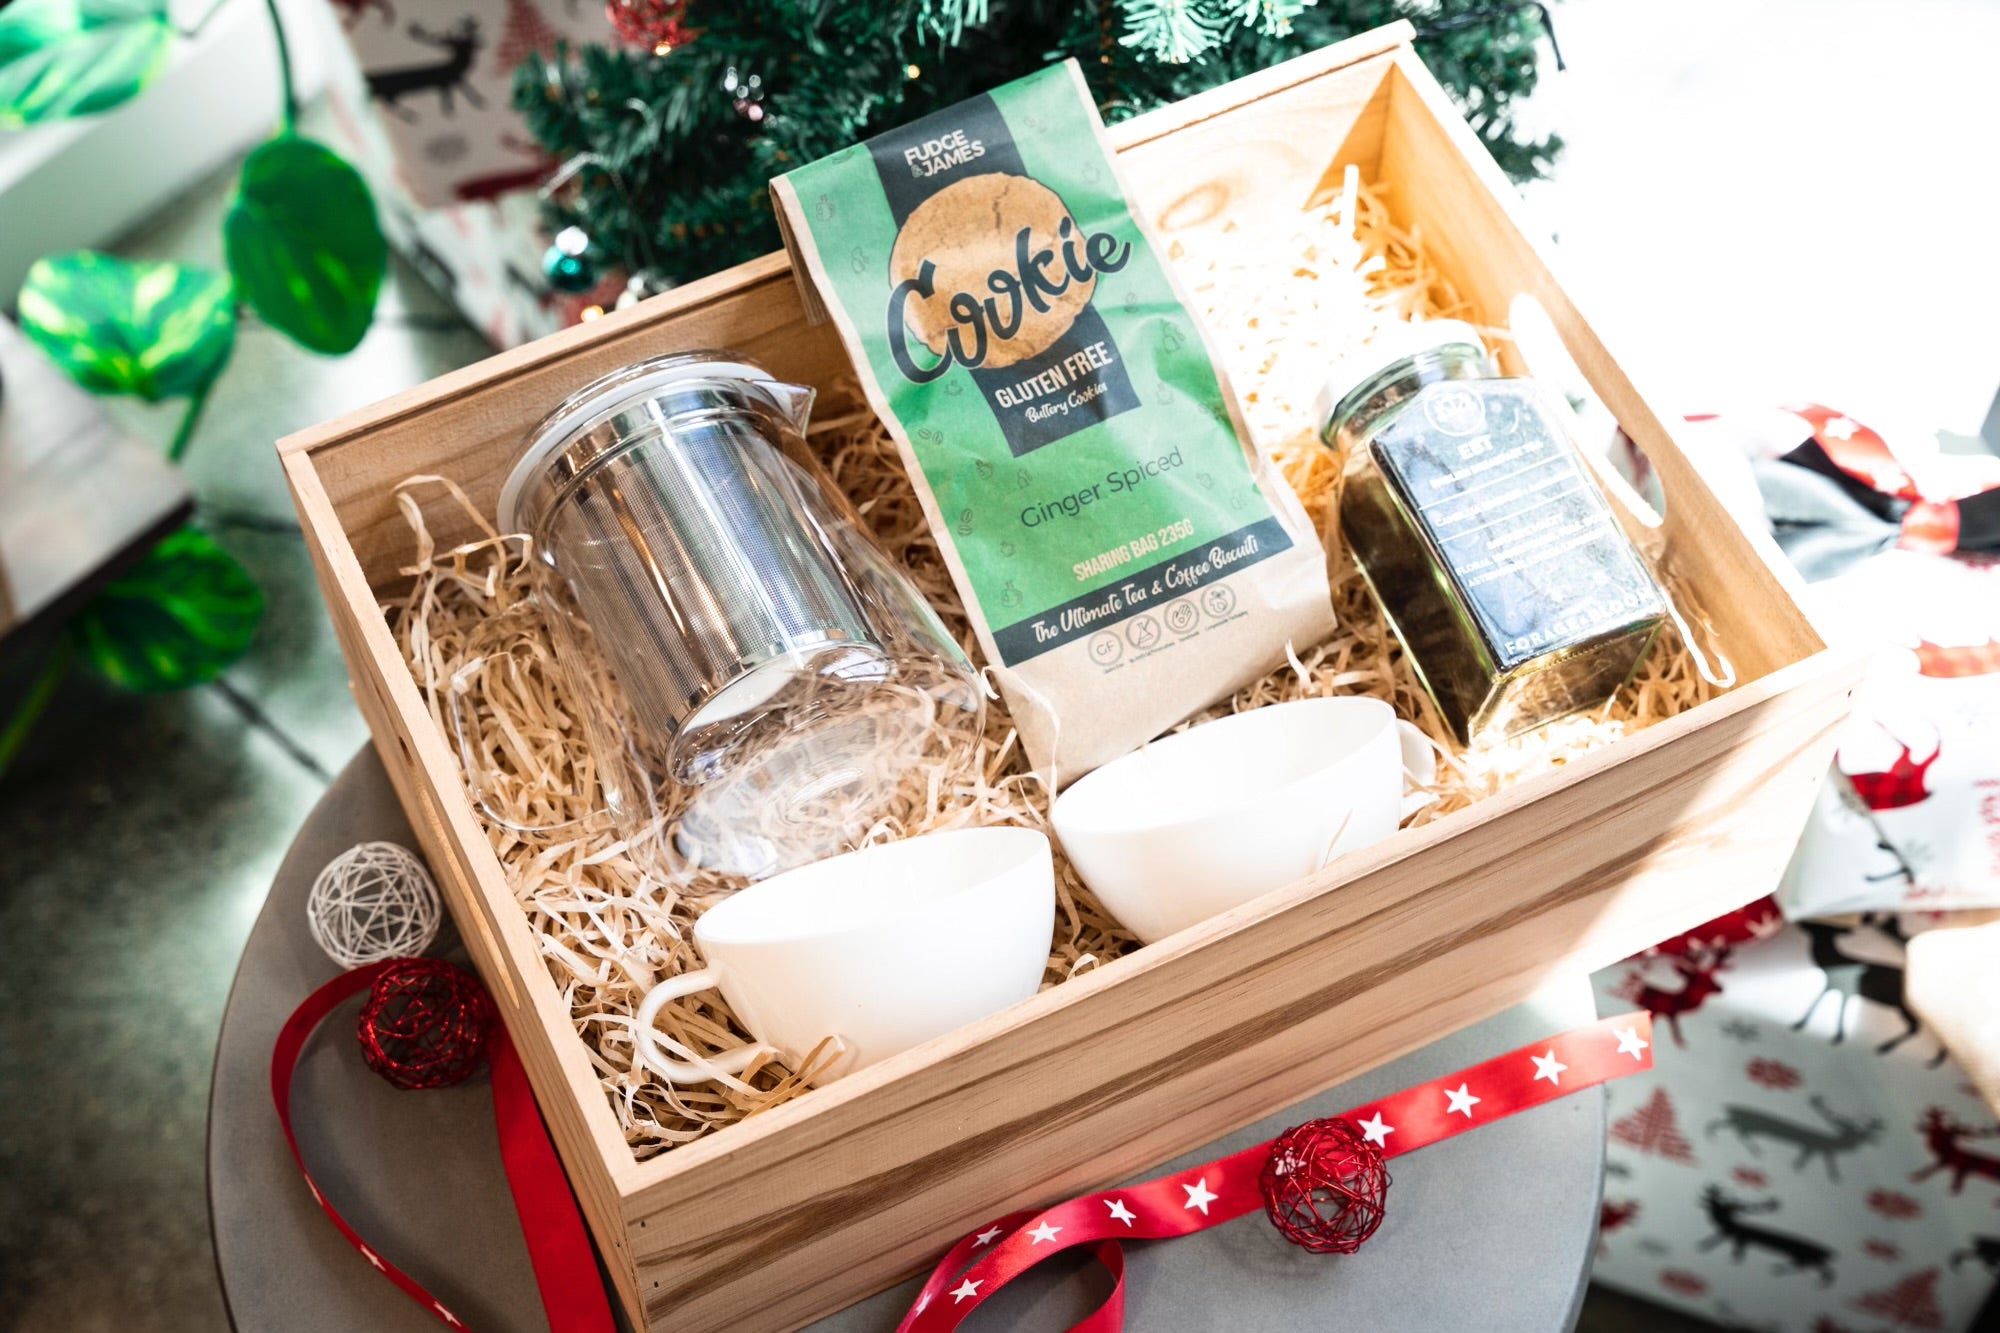 A festive Tea for Two holiday gift box by giftbox co. featuring gourmet loose leaf tea, a pair of elegant glass cups, and an accompanying glass infuser, thoughtfully arranged on a bed of natural straw and adorned with festive decorations.